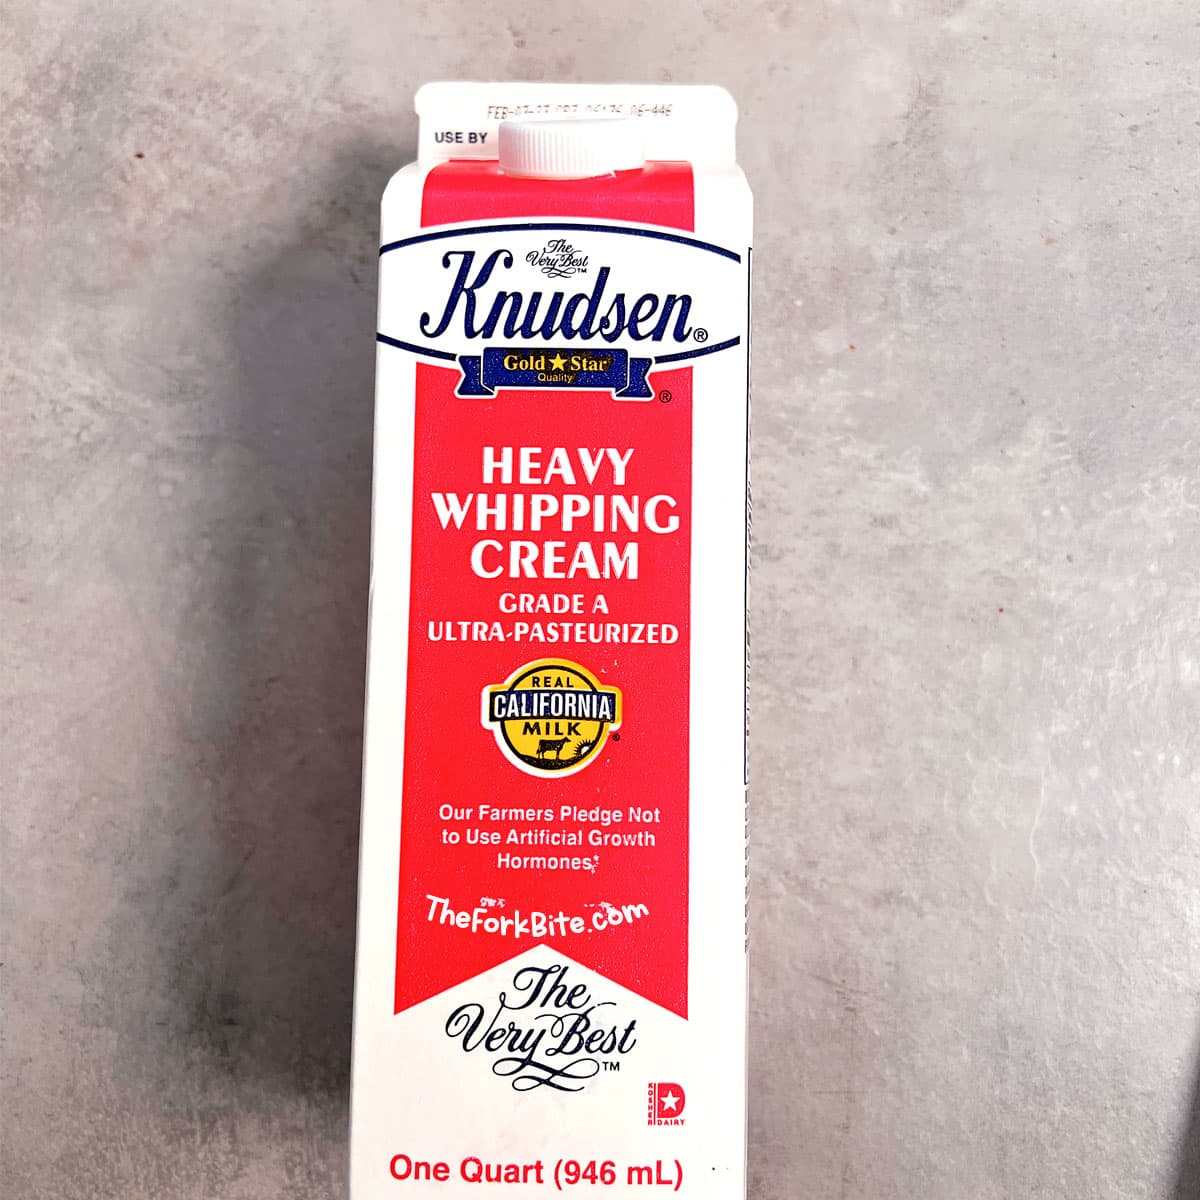 Heavy cream is a fatty dairy product that adds richness and thickness to the Hamburger Helper. It can help create a fuller, creamier texture in dishes.